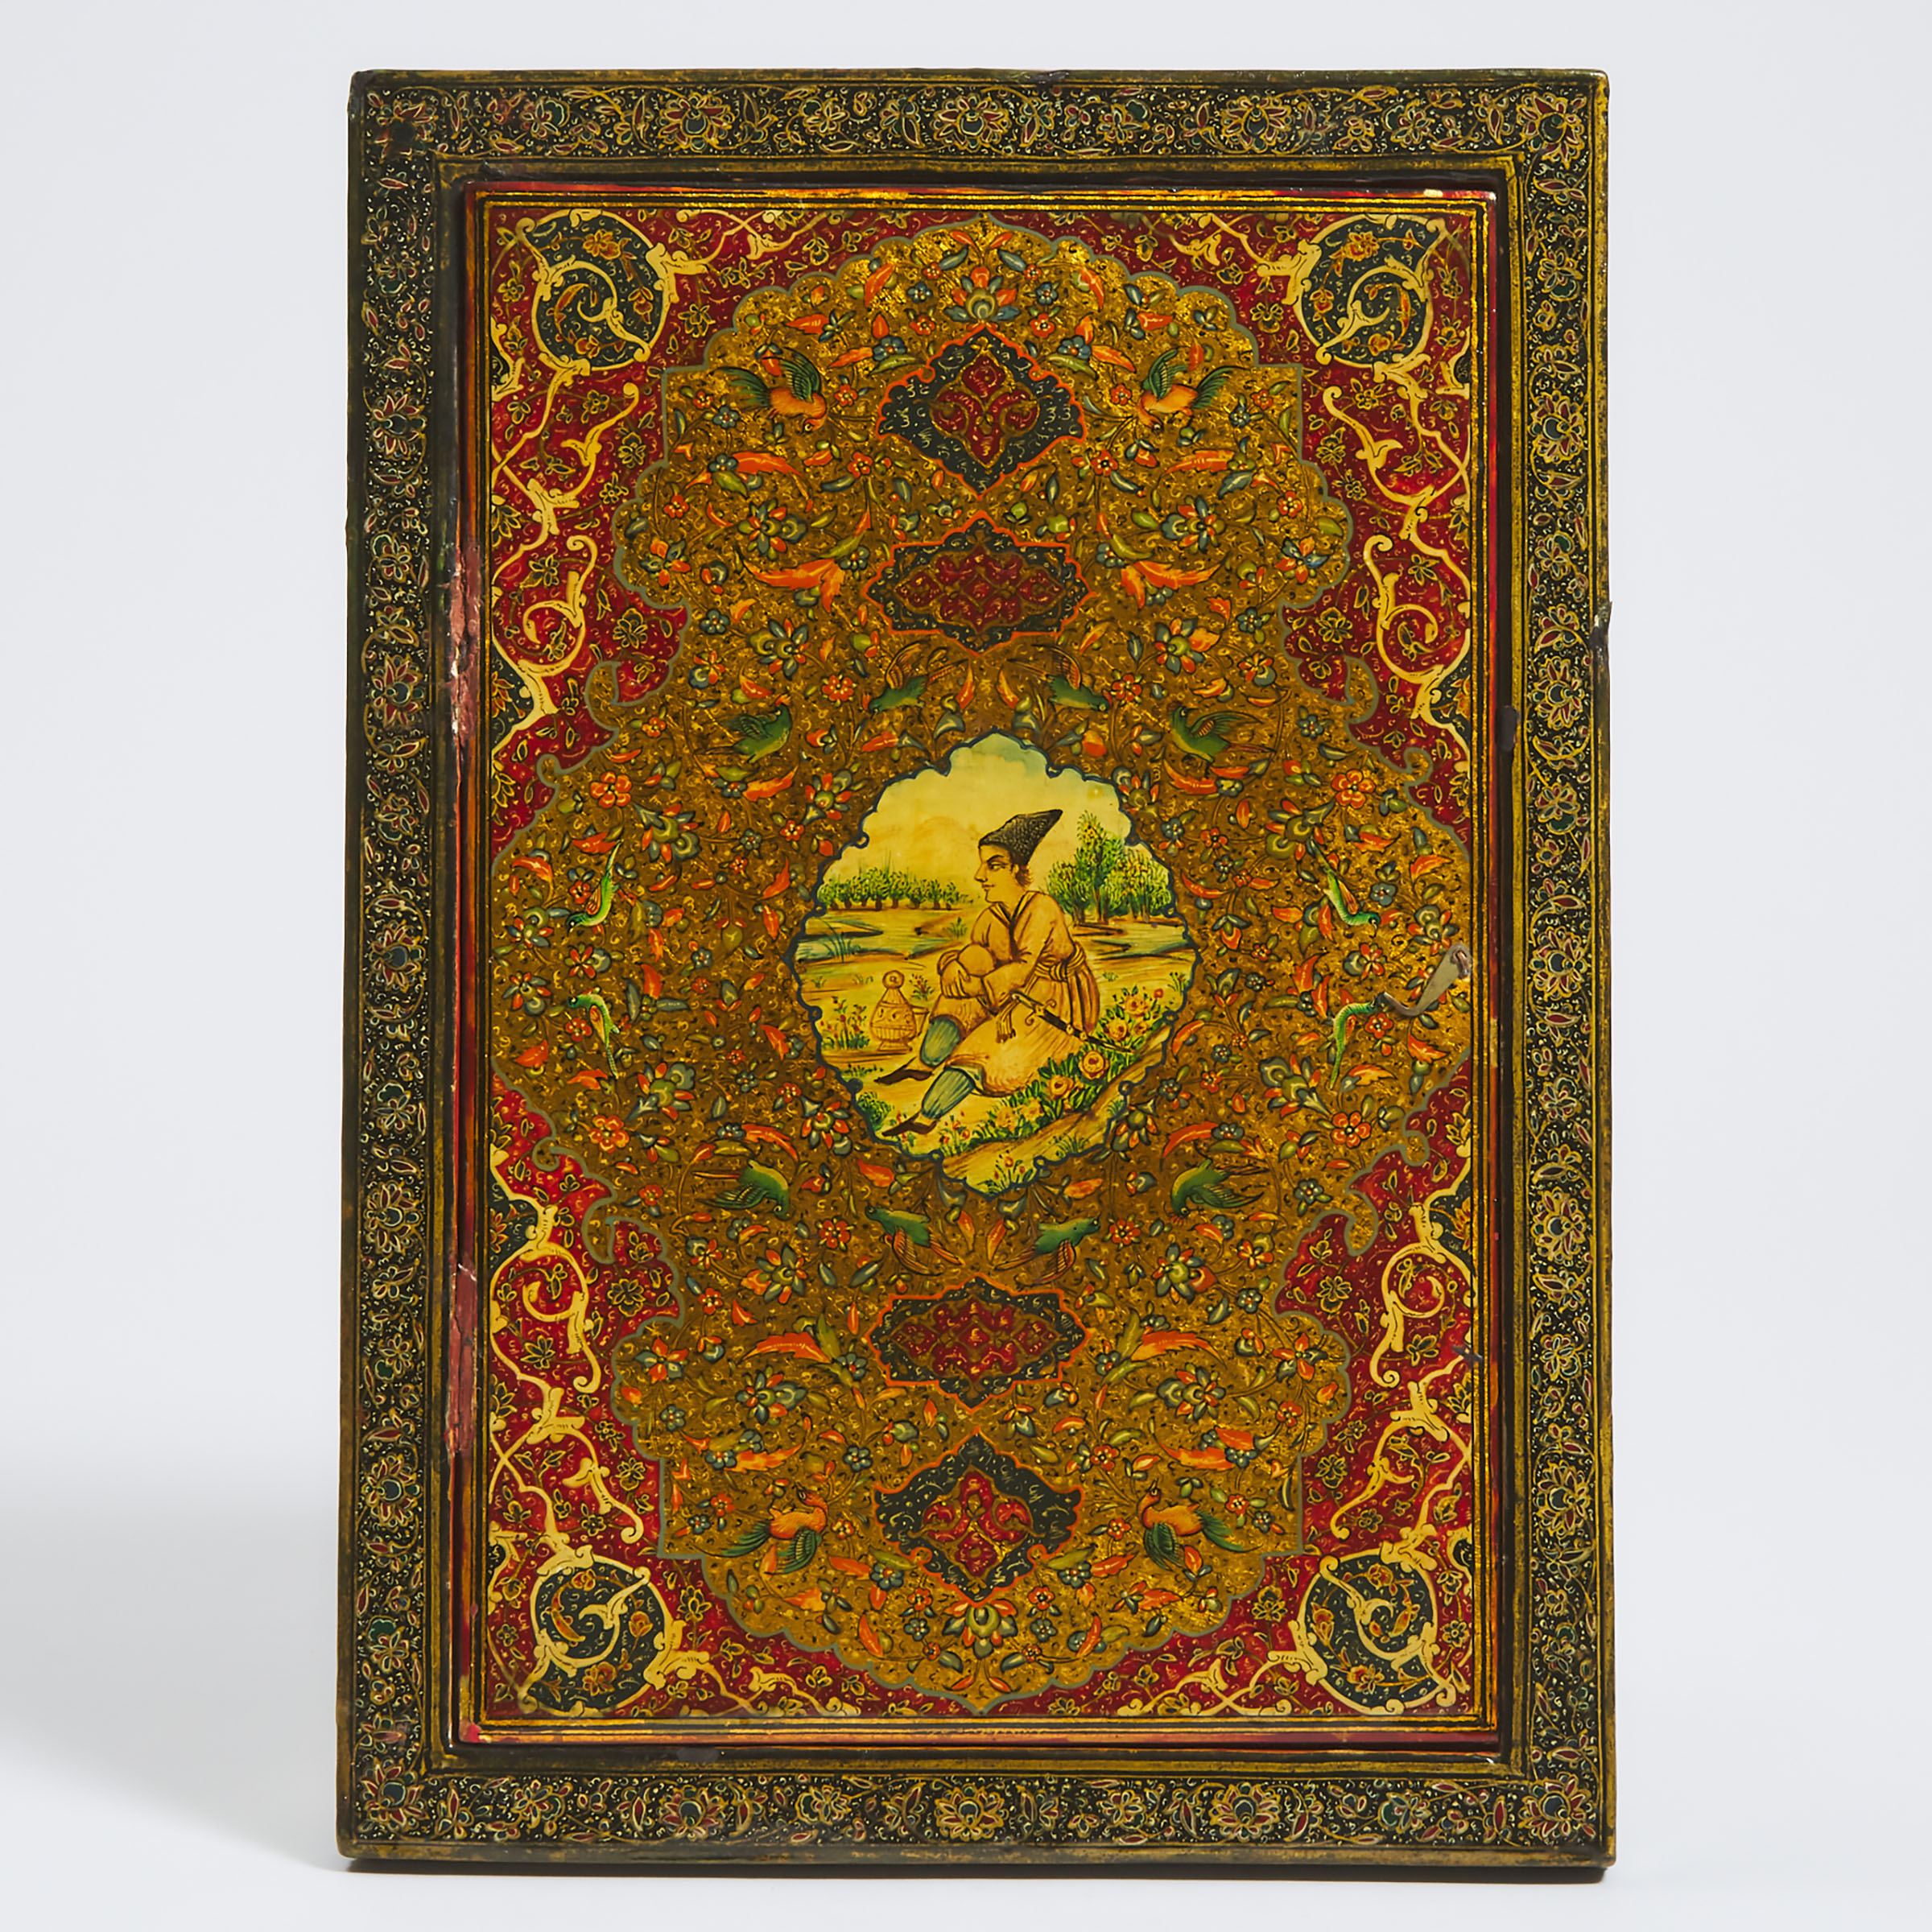 A Qajar Polychromed Lacquer Papier Maché Mirror Case, Persia, Early 20th Century